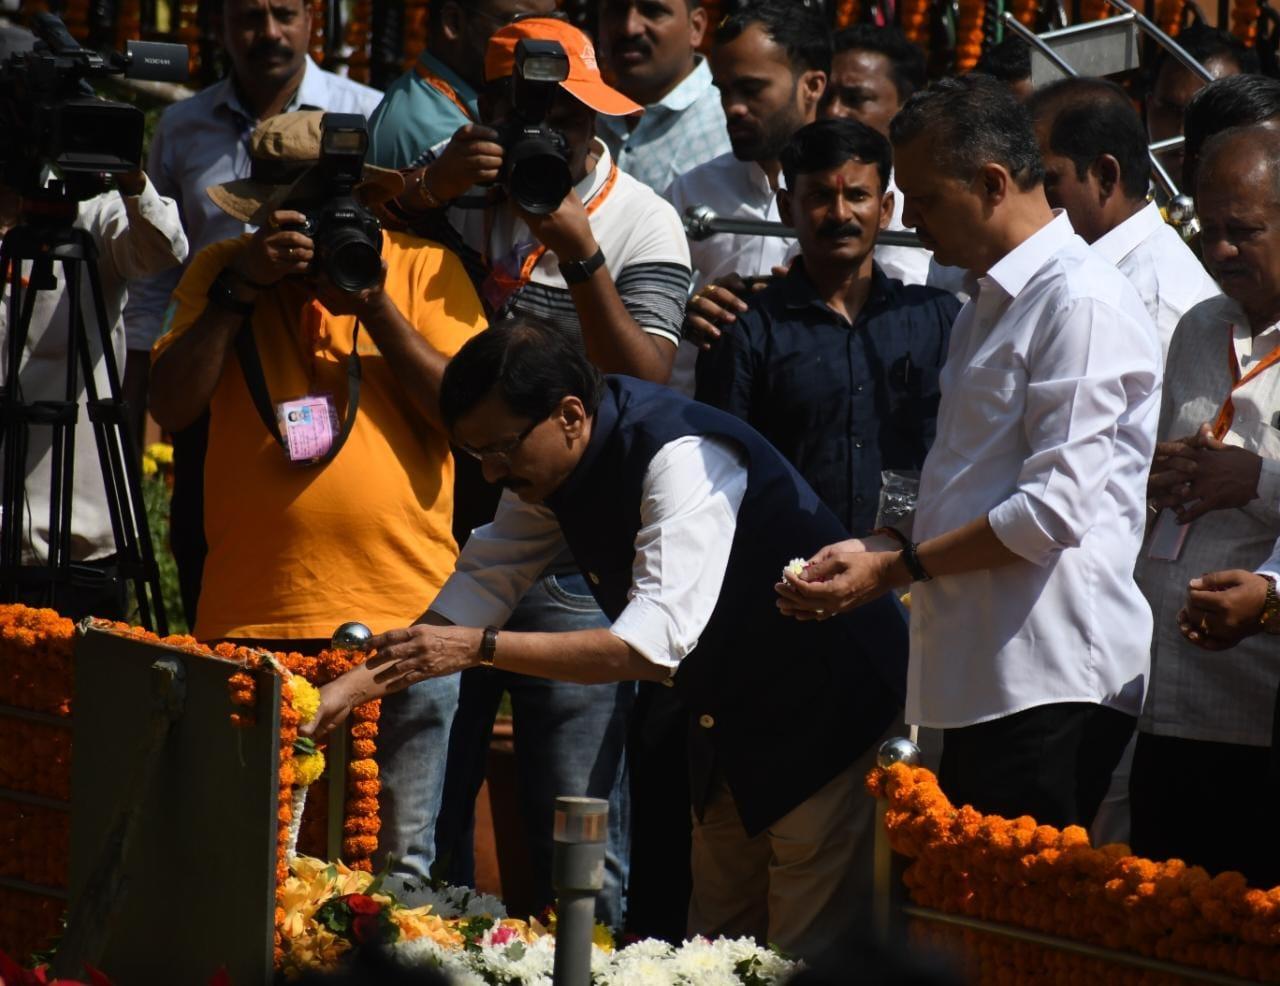 Earlier, Chief Minister Eknath Shinde and 39 other MLAs of the Sena camp led by him had paid tributes to Bal Thackeray at his memorial on Wednesday night.